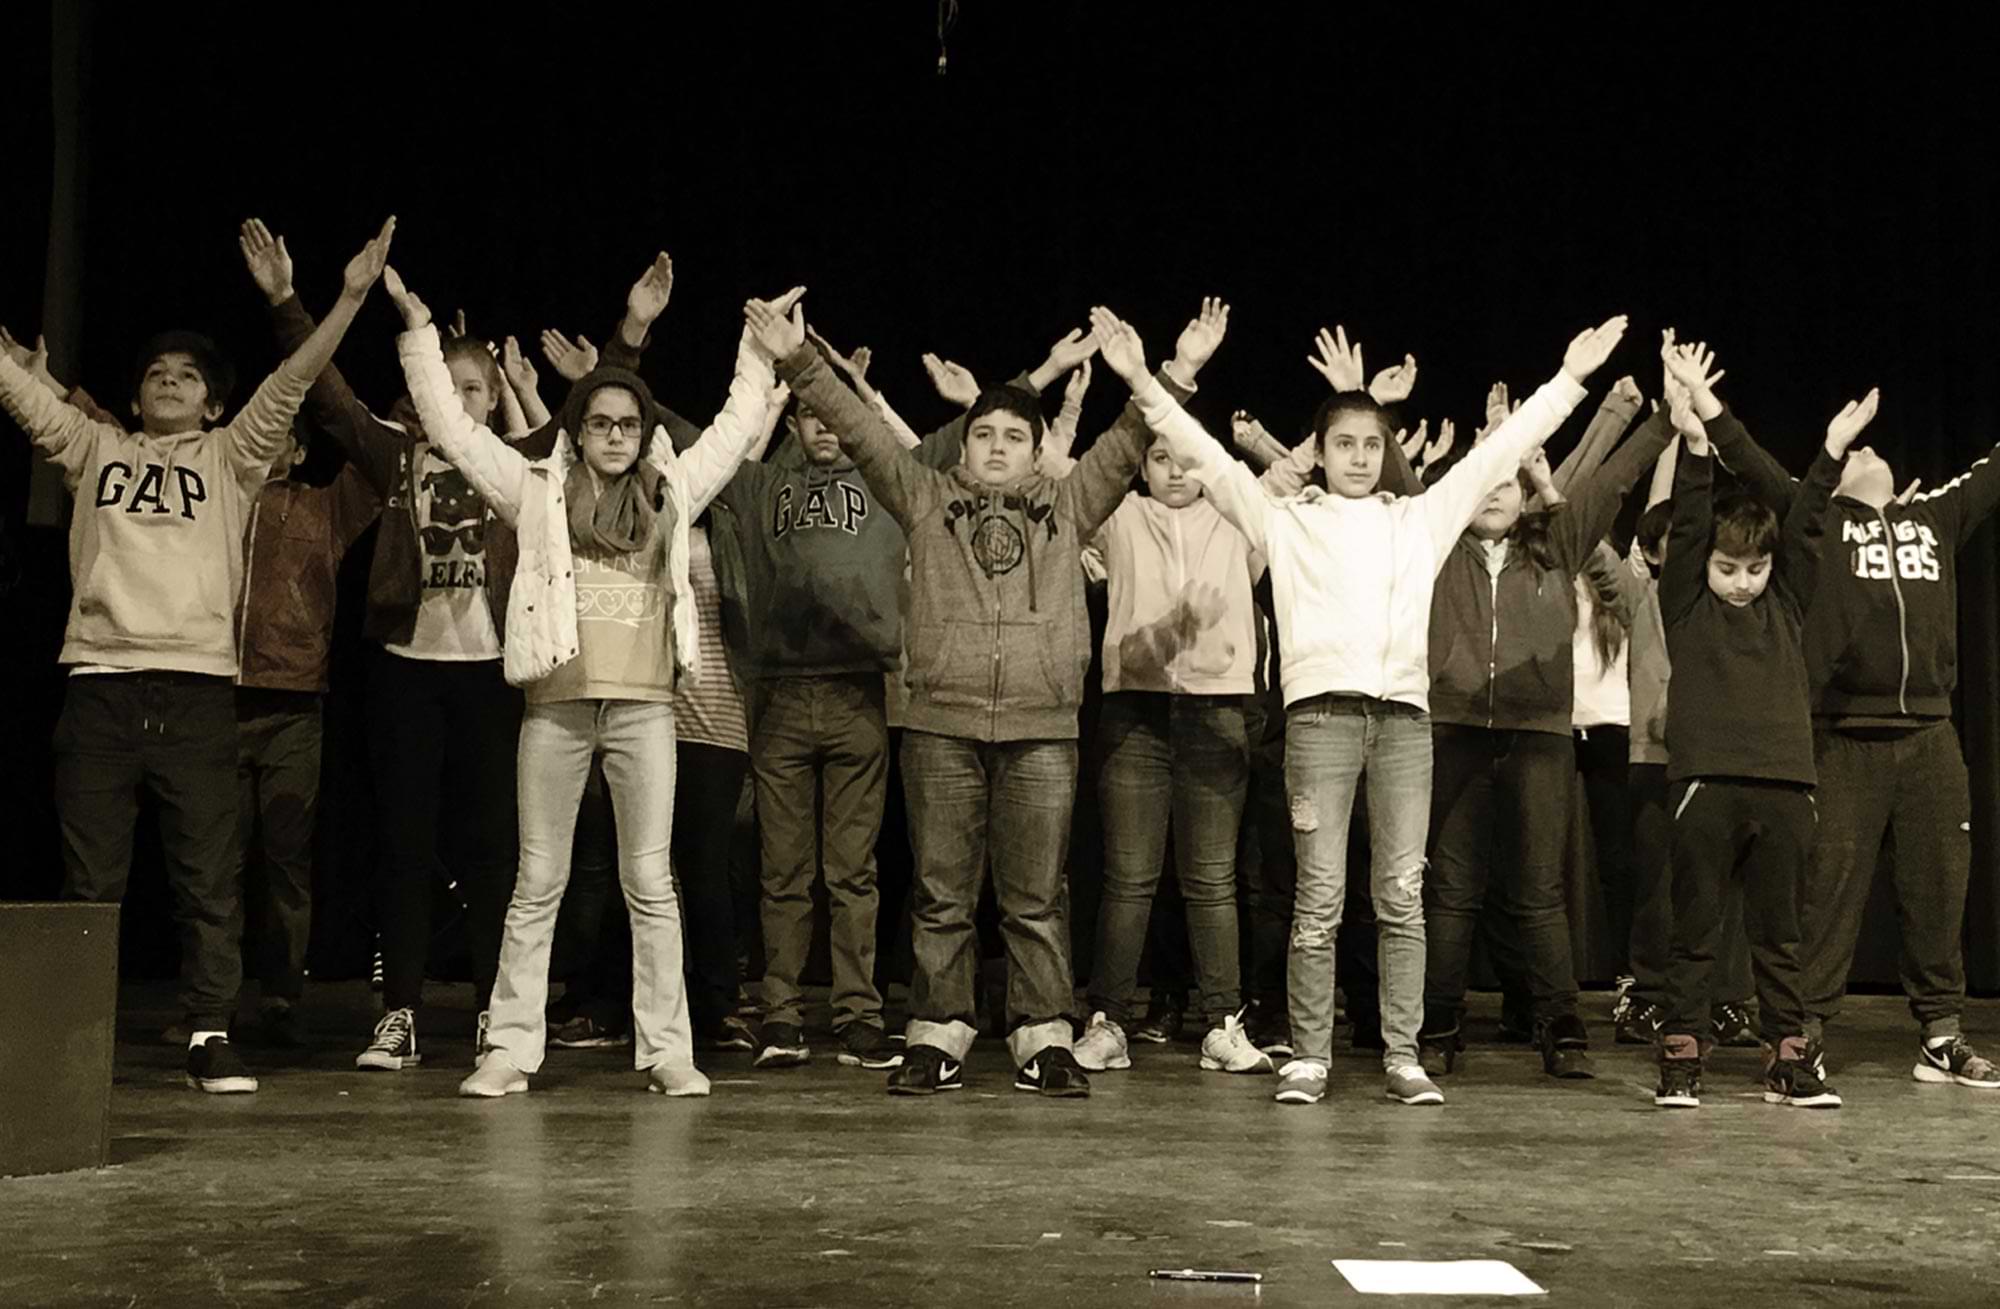 middle school aged children on stage during a performance